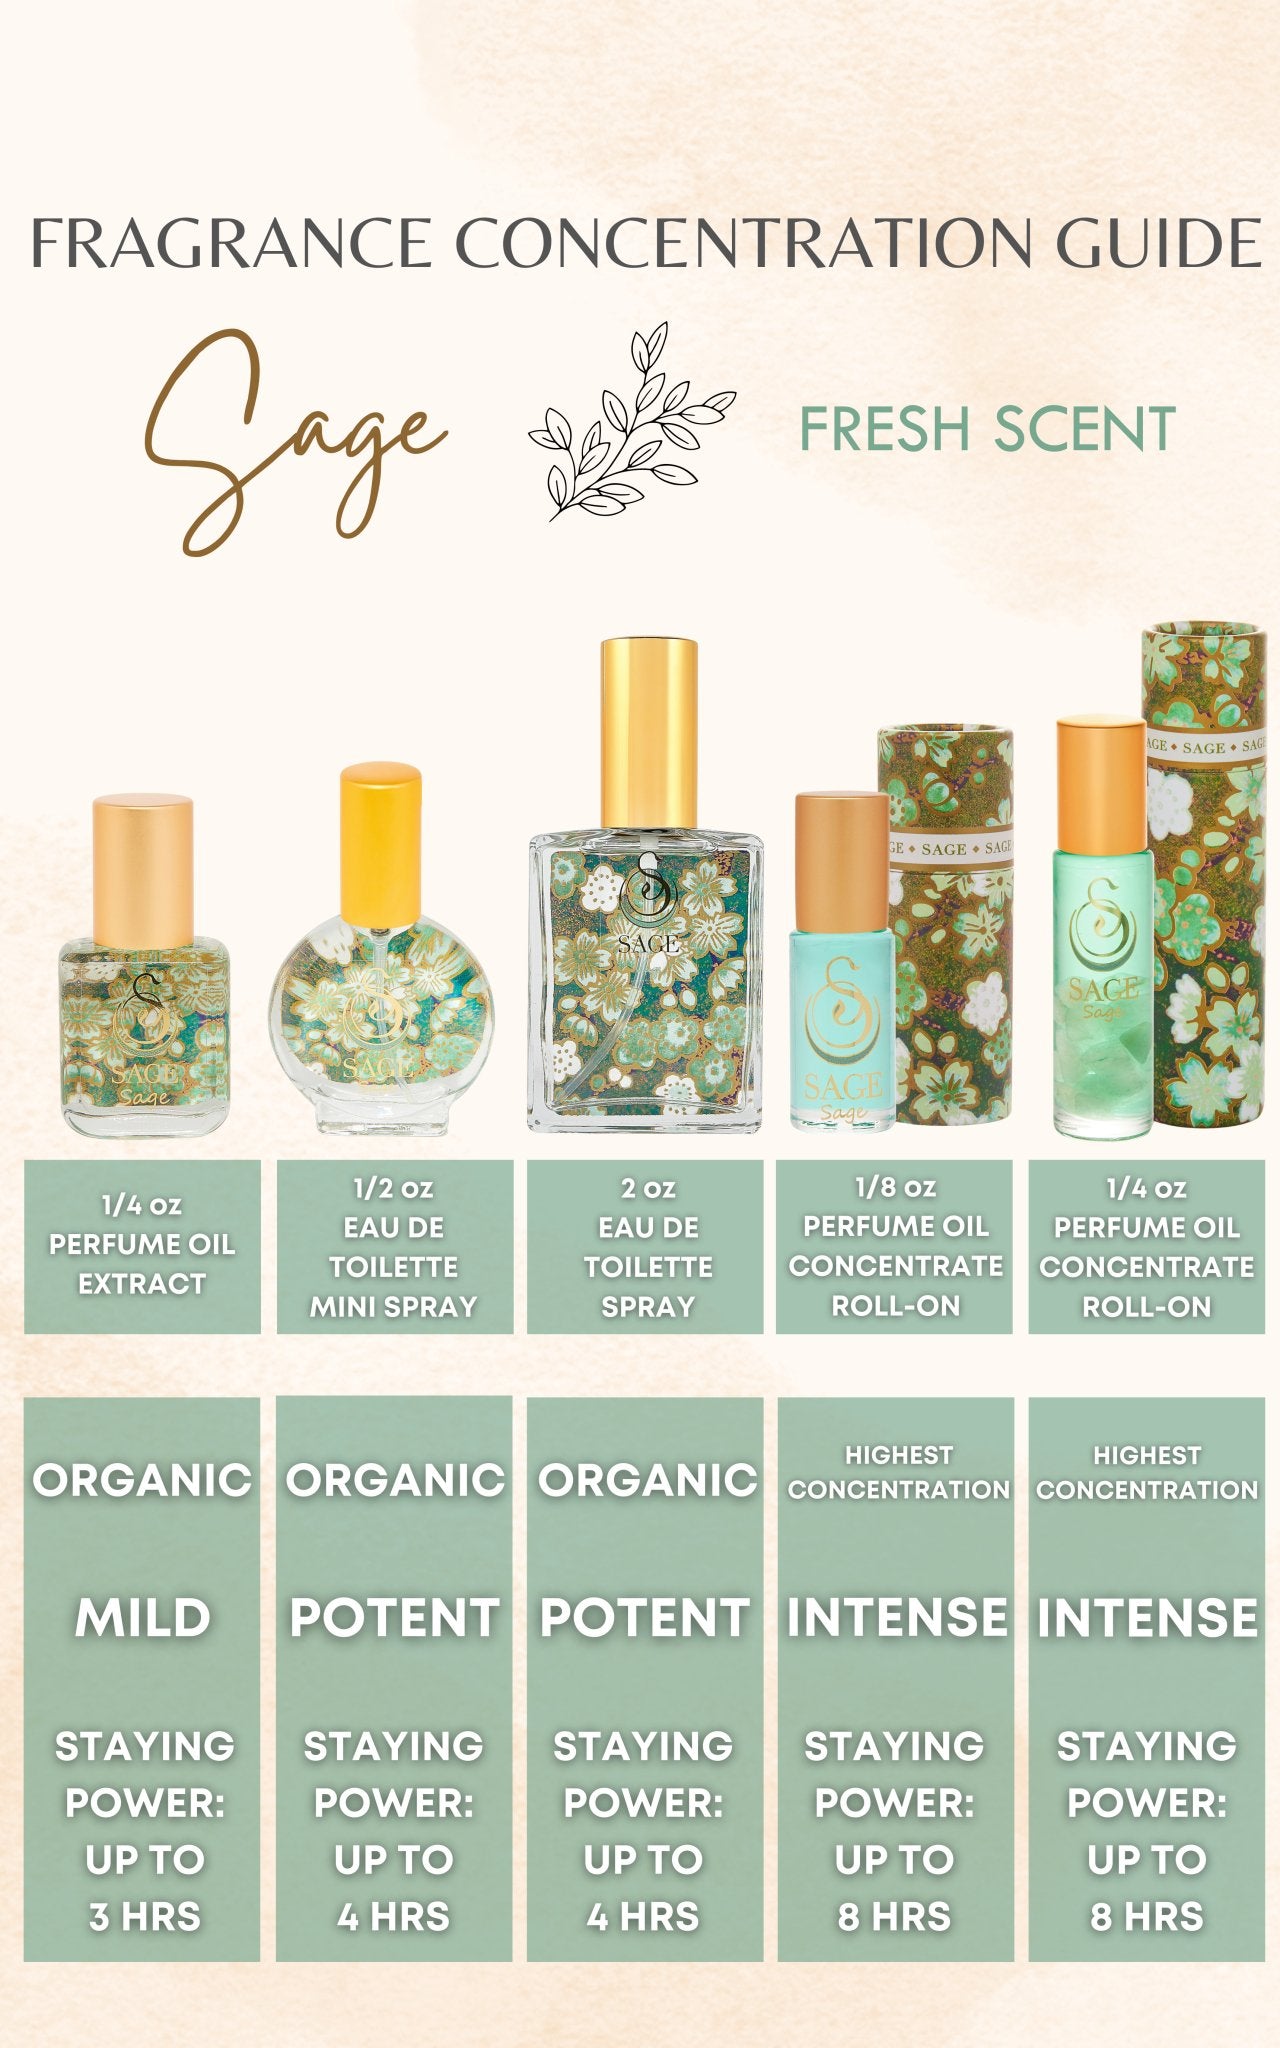 Sage Organic 1/4 oz Perfume Oil Extract Roll-On by Sage - The Sage Lifestyle